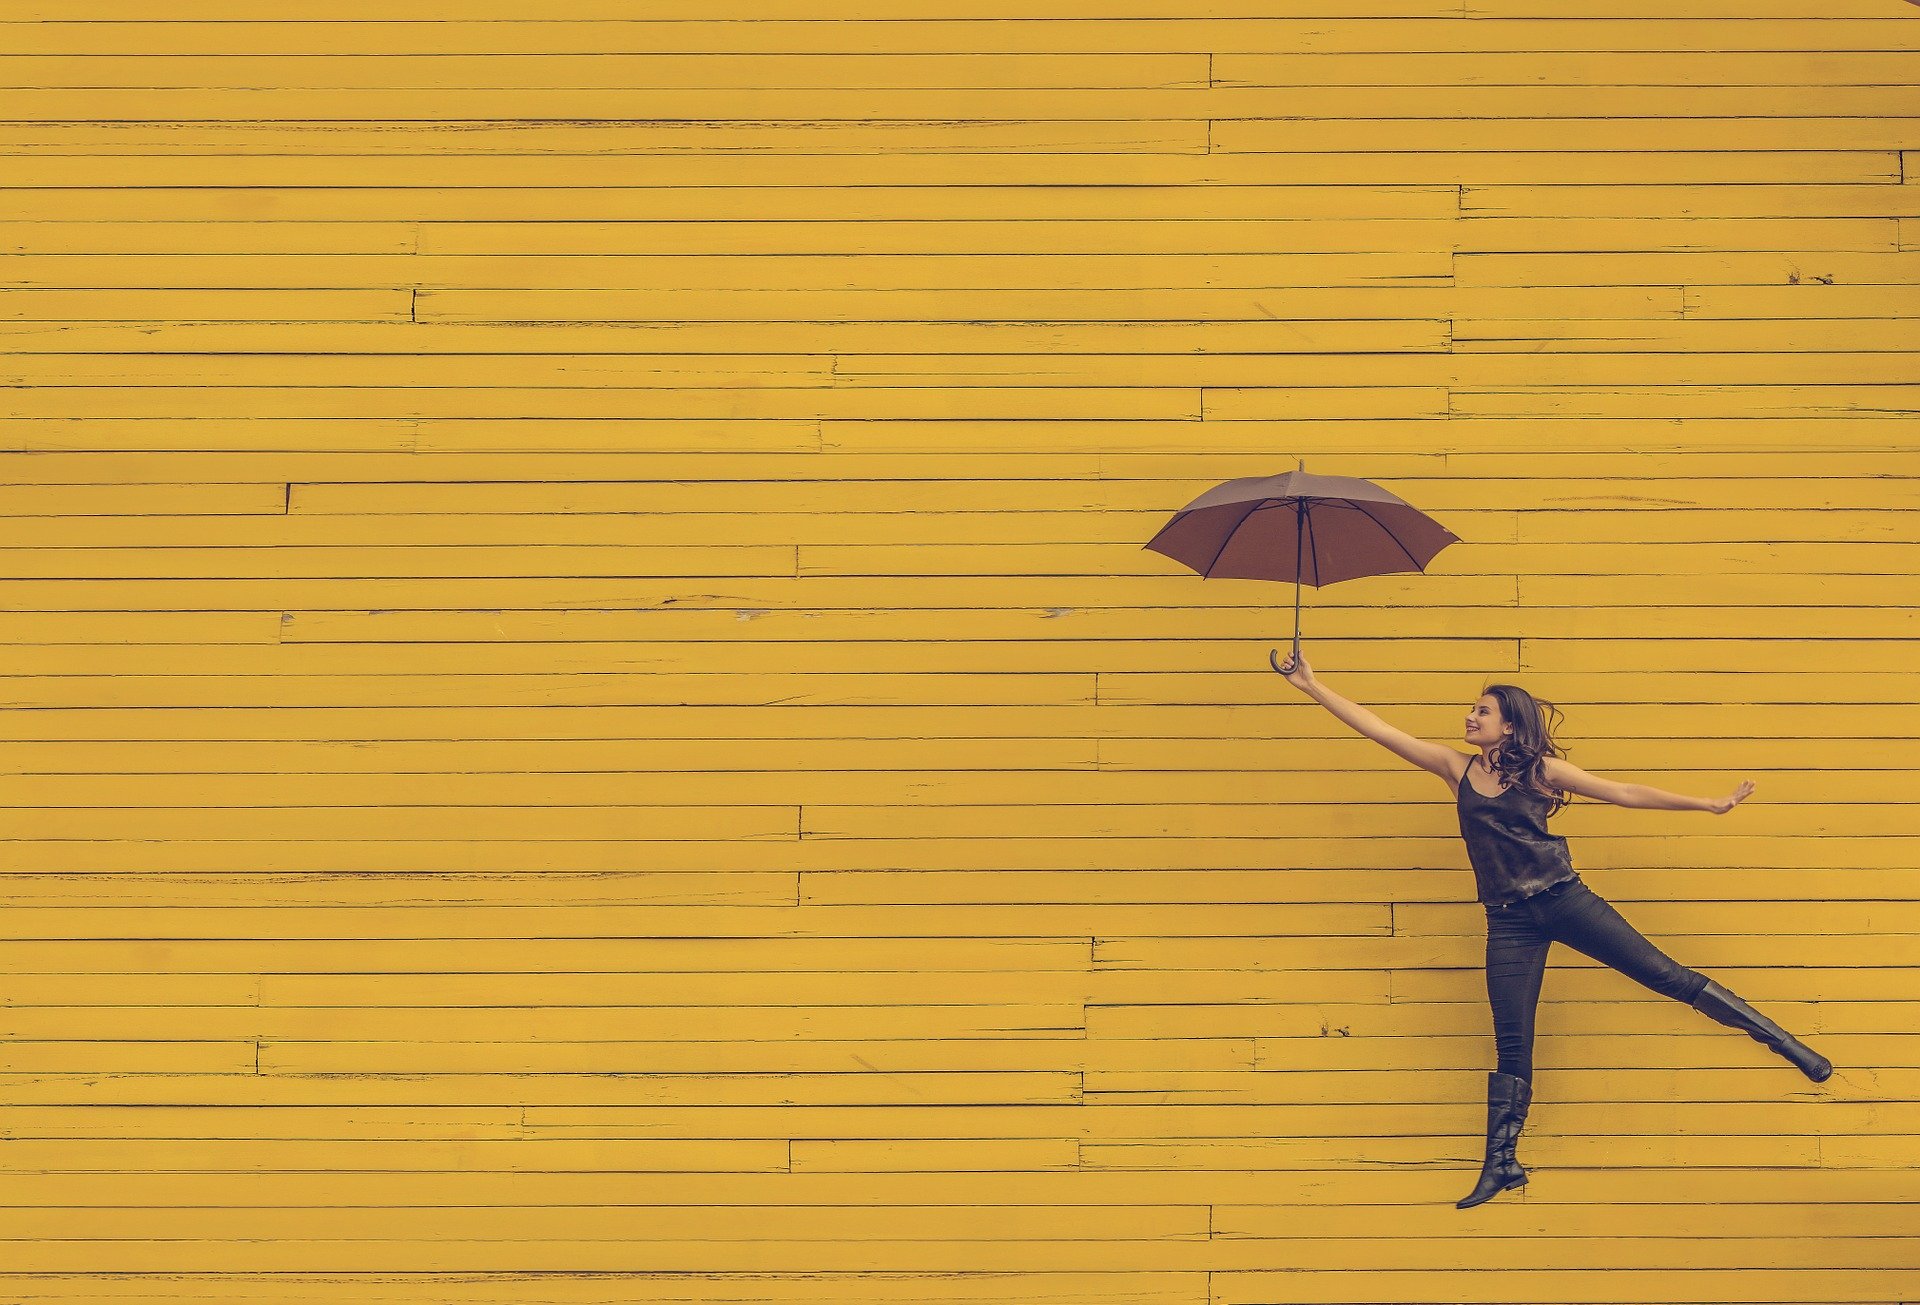 A woman, dressed in black, is playfully holding an open umbrella and appears to be floating against a bright yellow wooden wall. She extends one leg behind her in mid-air, creating a whimsical scene that reminds us how essential moments of joy are even during mental health treatment. The overall tone is cheerful and light-hearted.